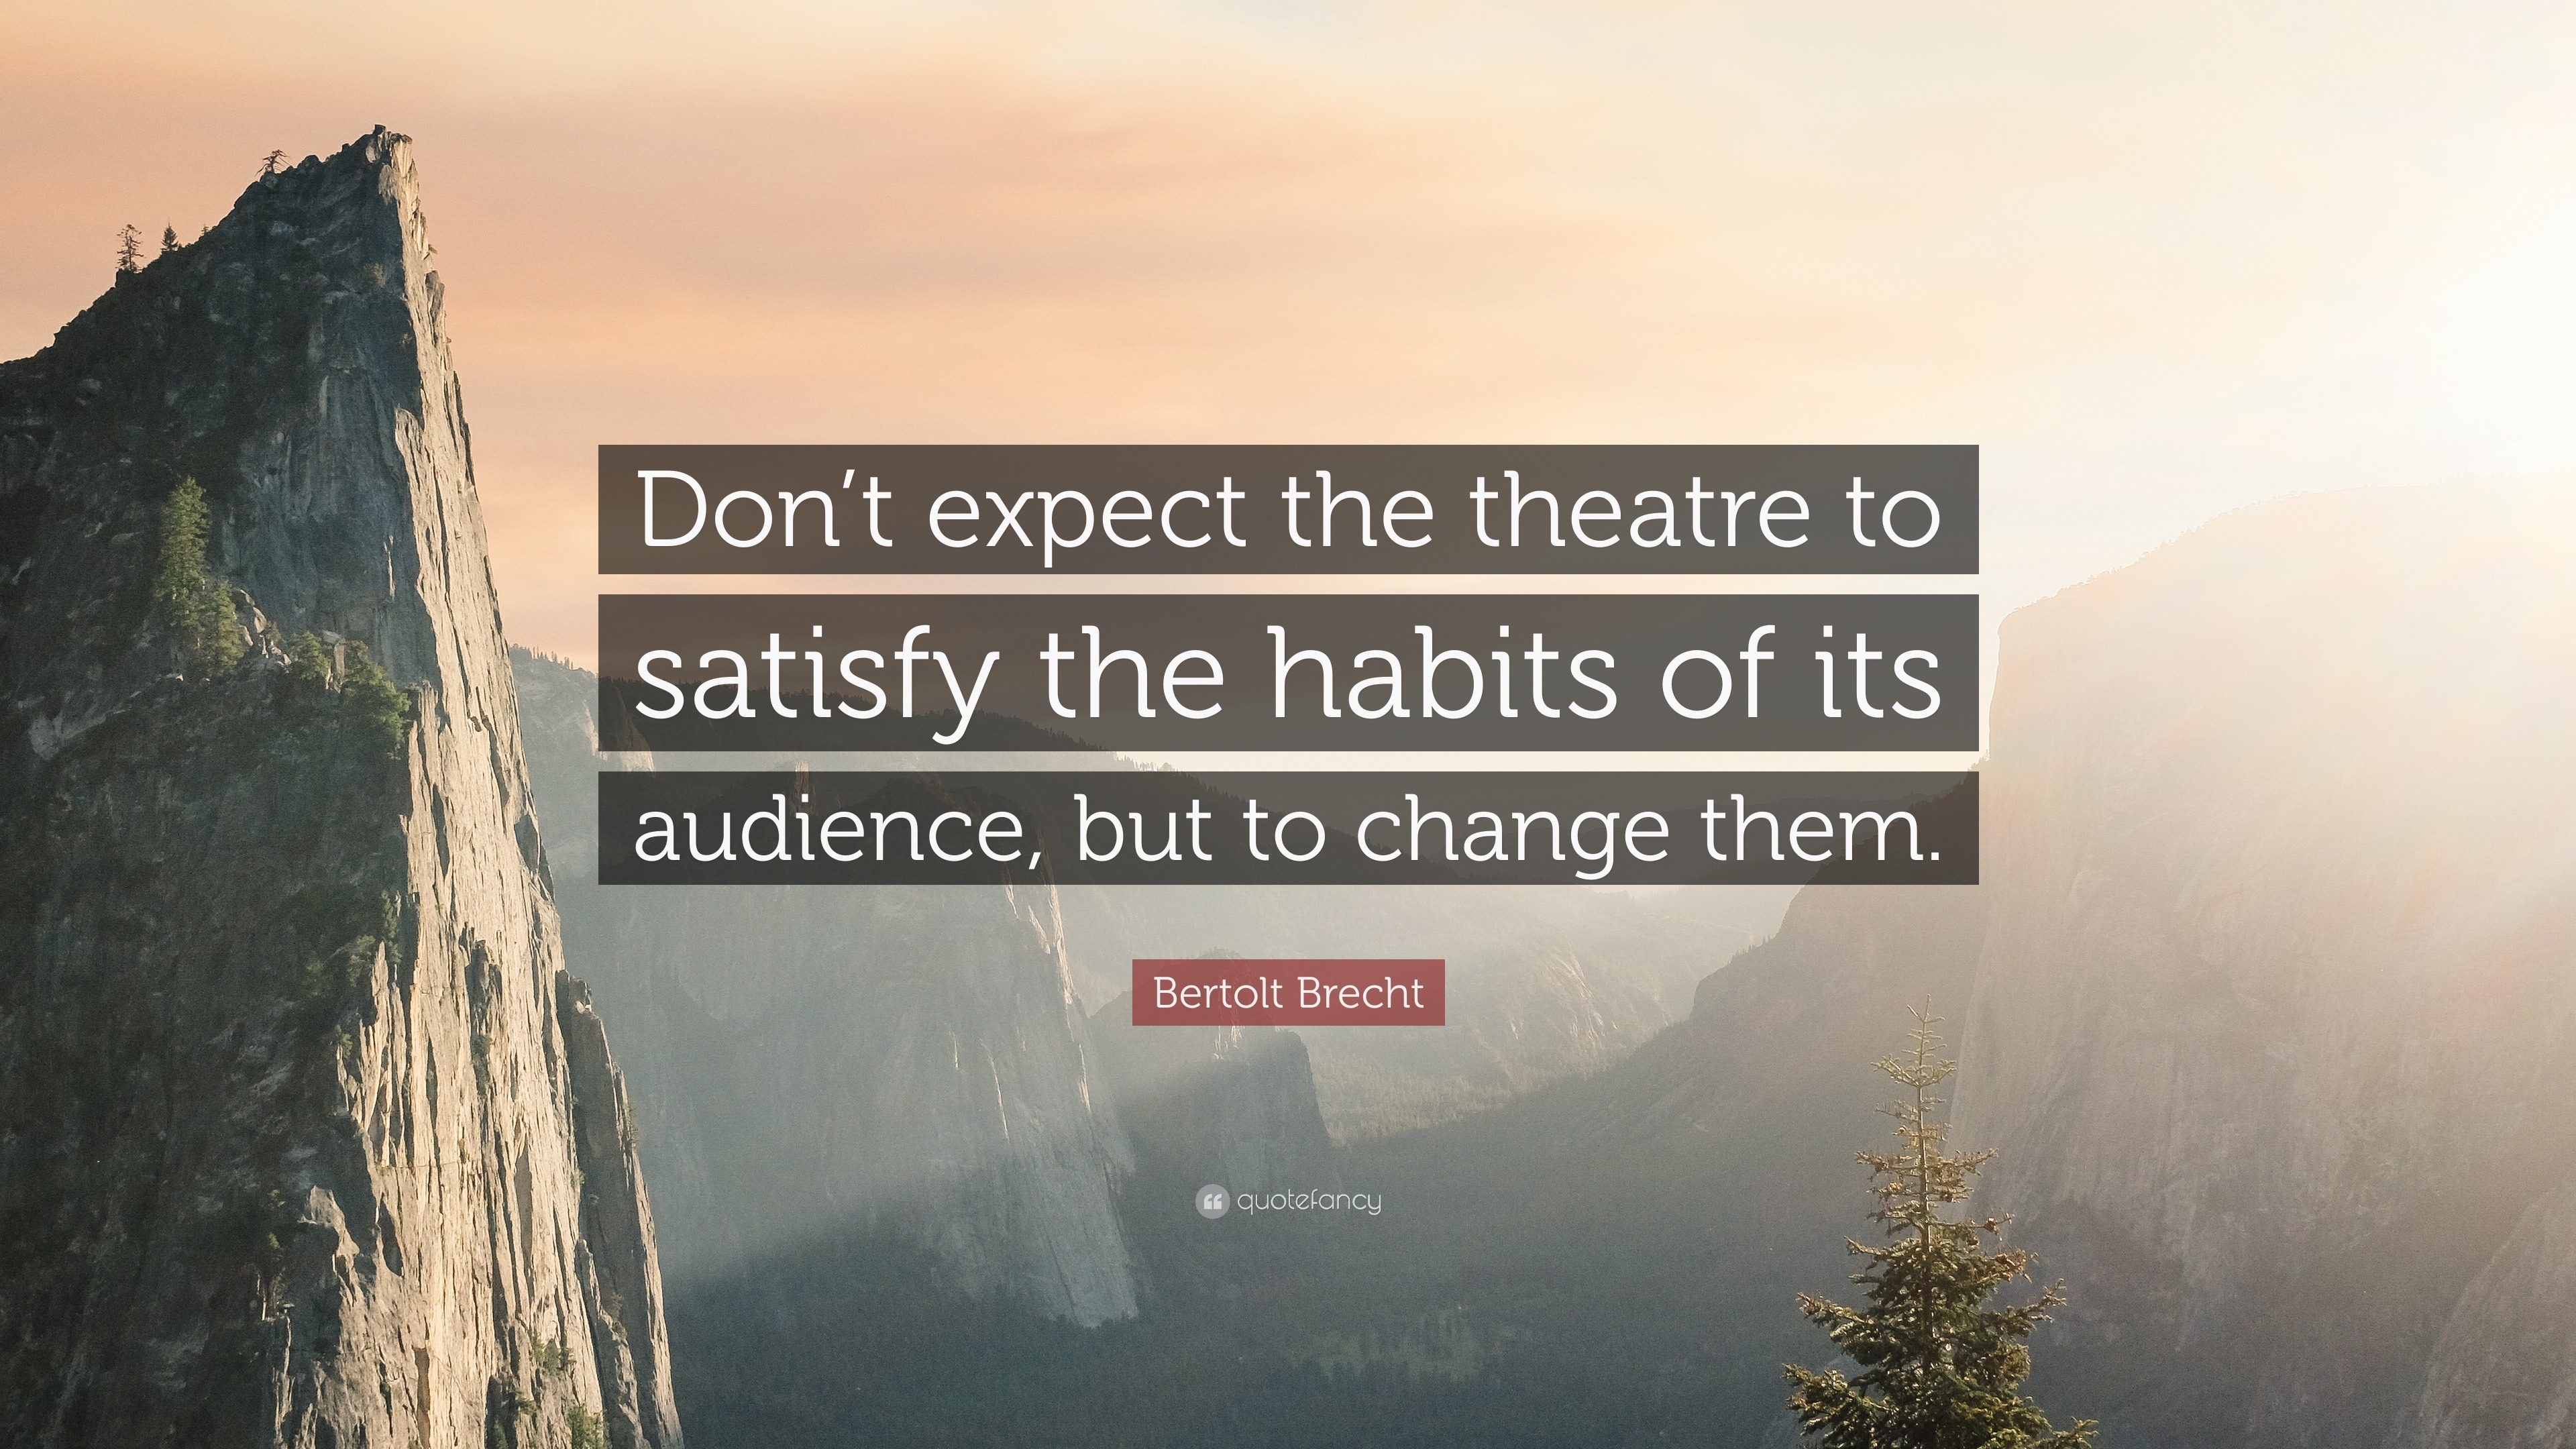 Bertolt Brecht Quote: “Don’t expect the theatre to satisfy the habits